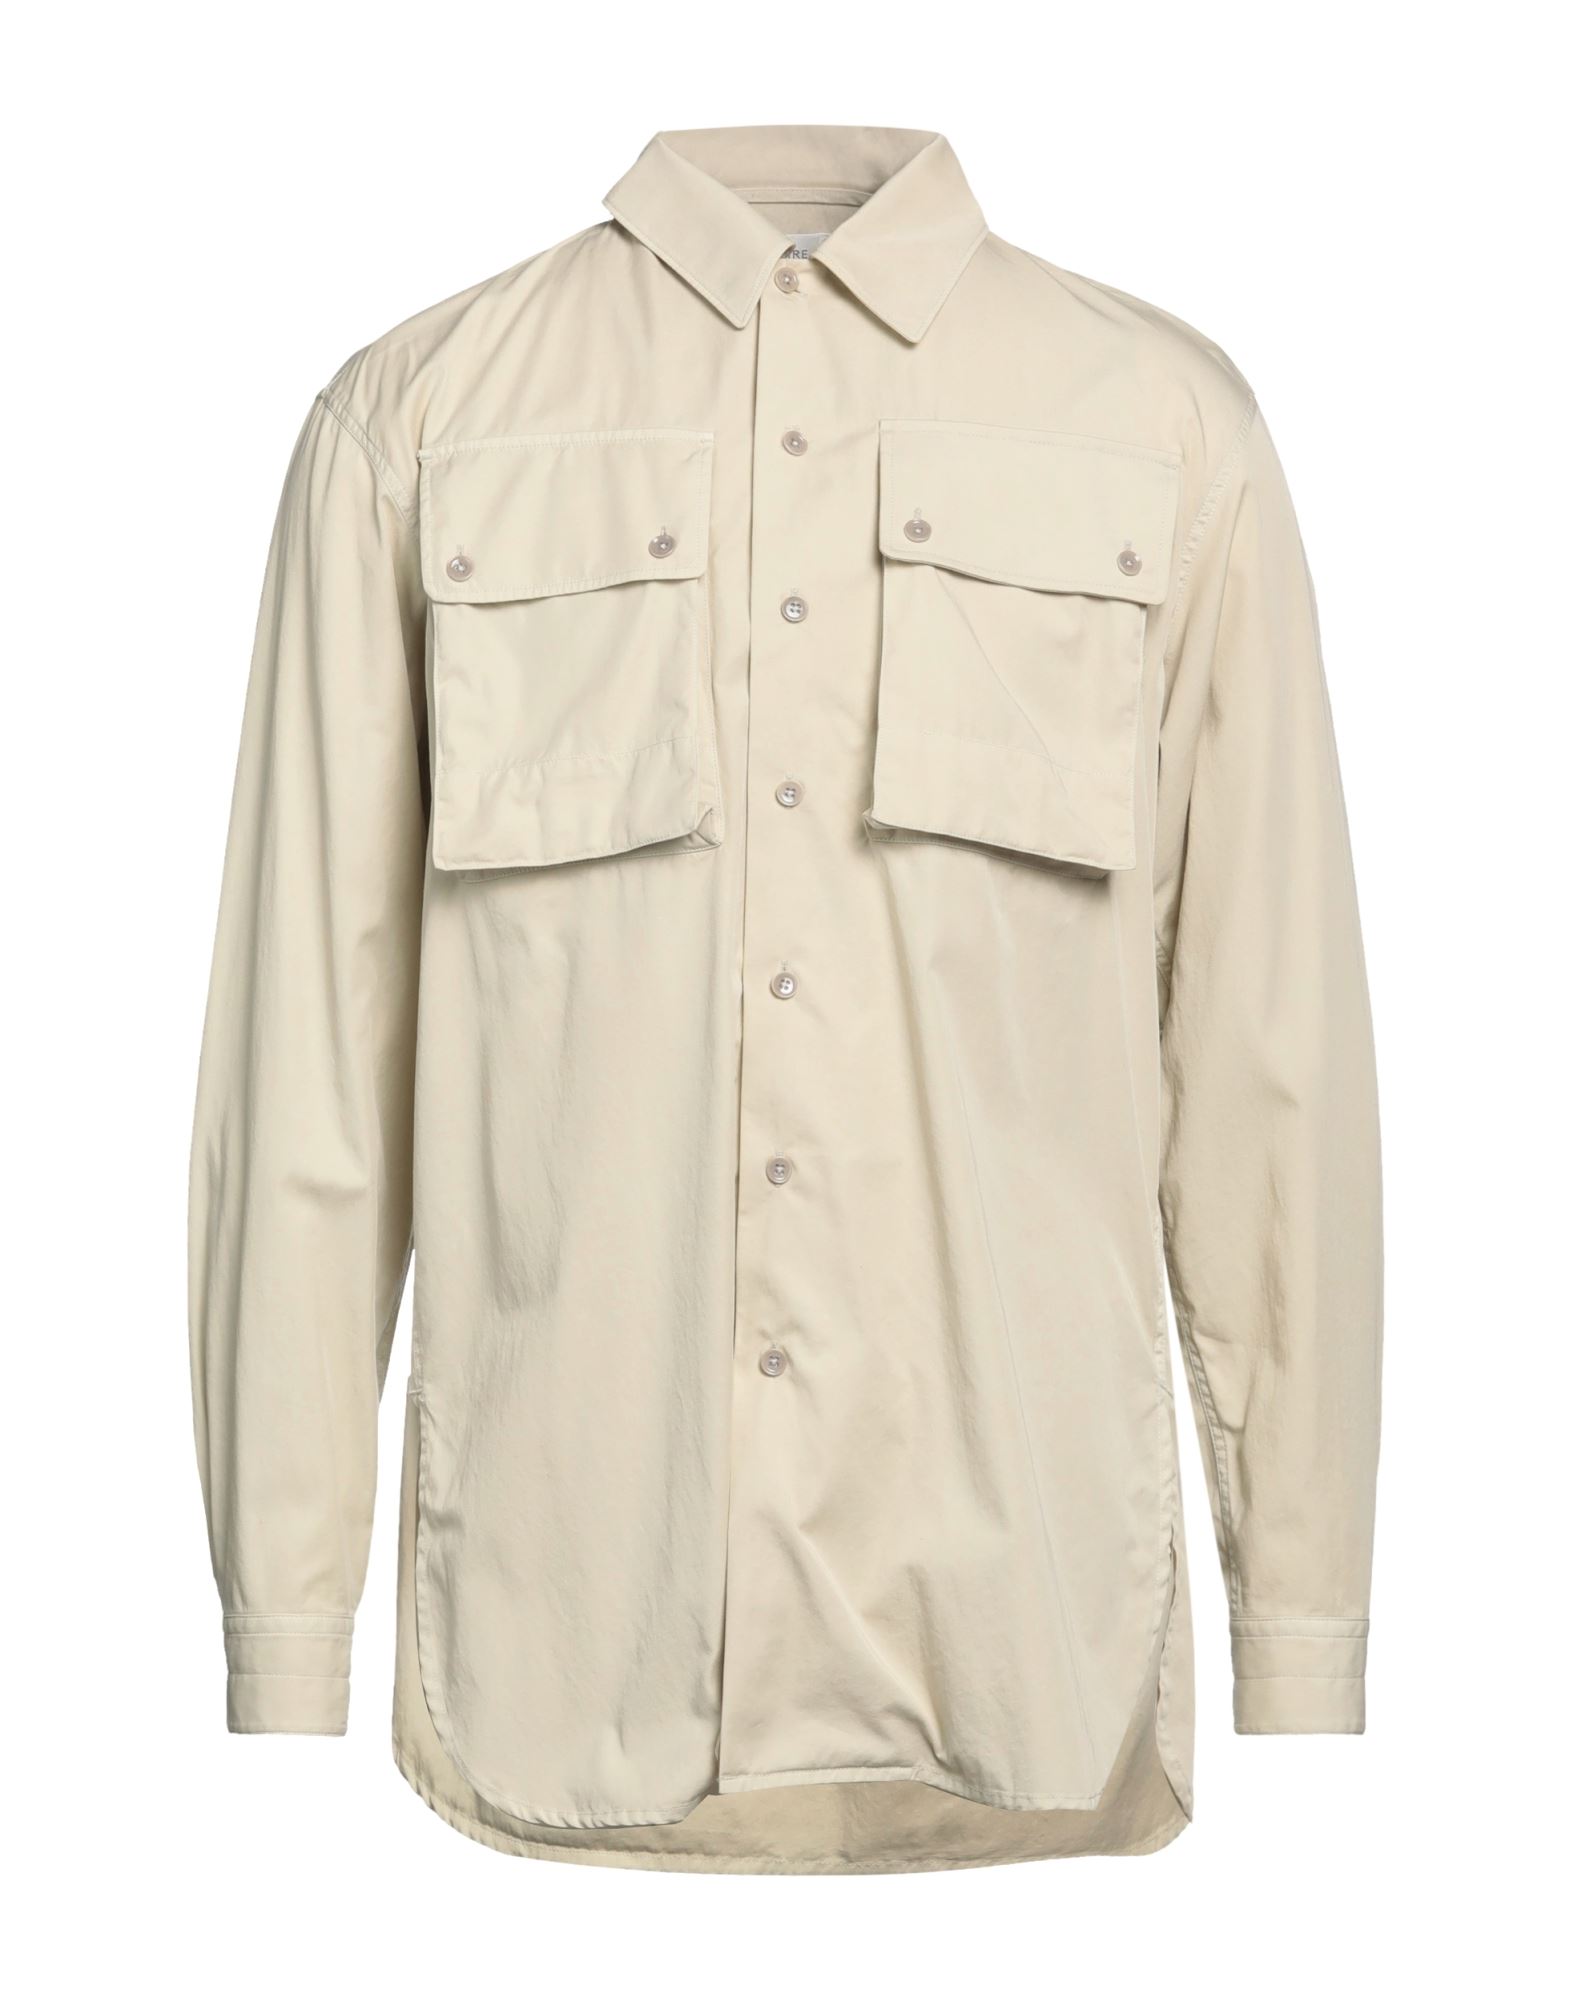 LEMAIRE 20aw military shirt シャツ トップス メンズ 【特別セール品】